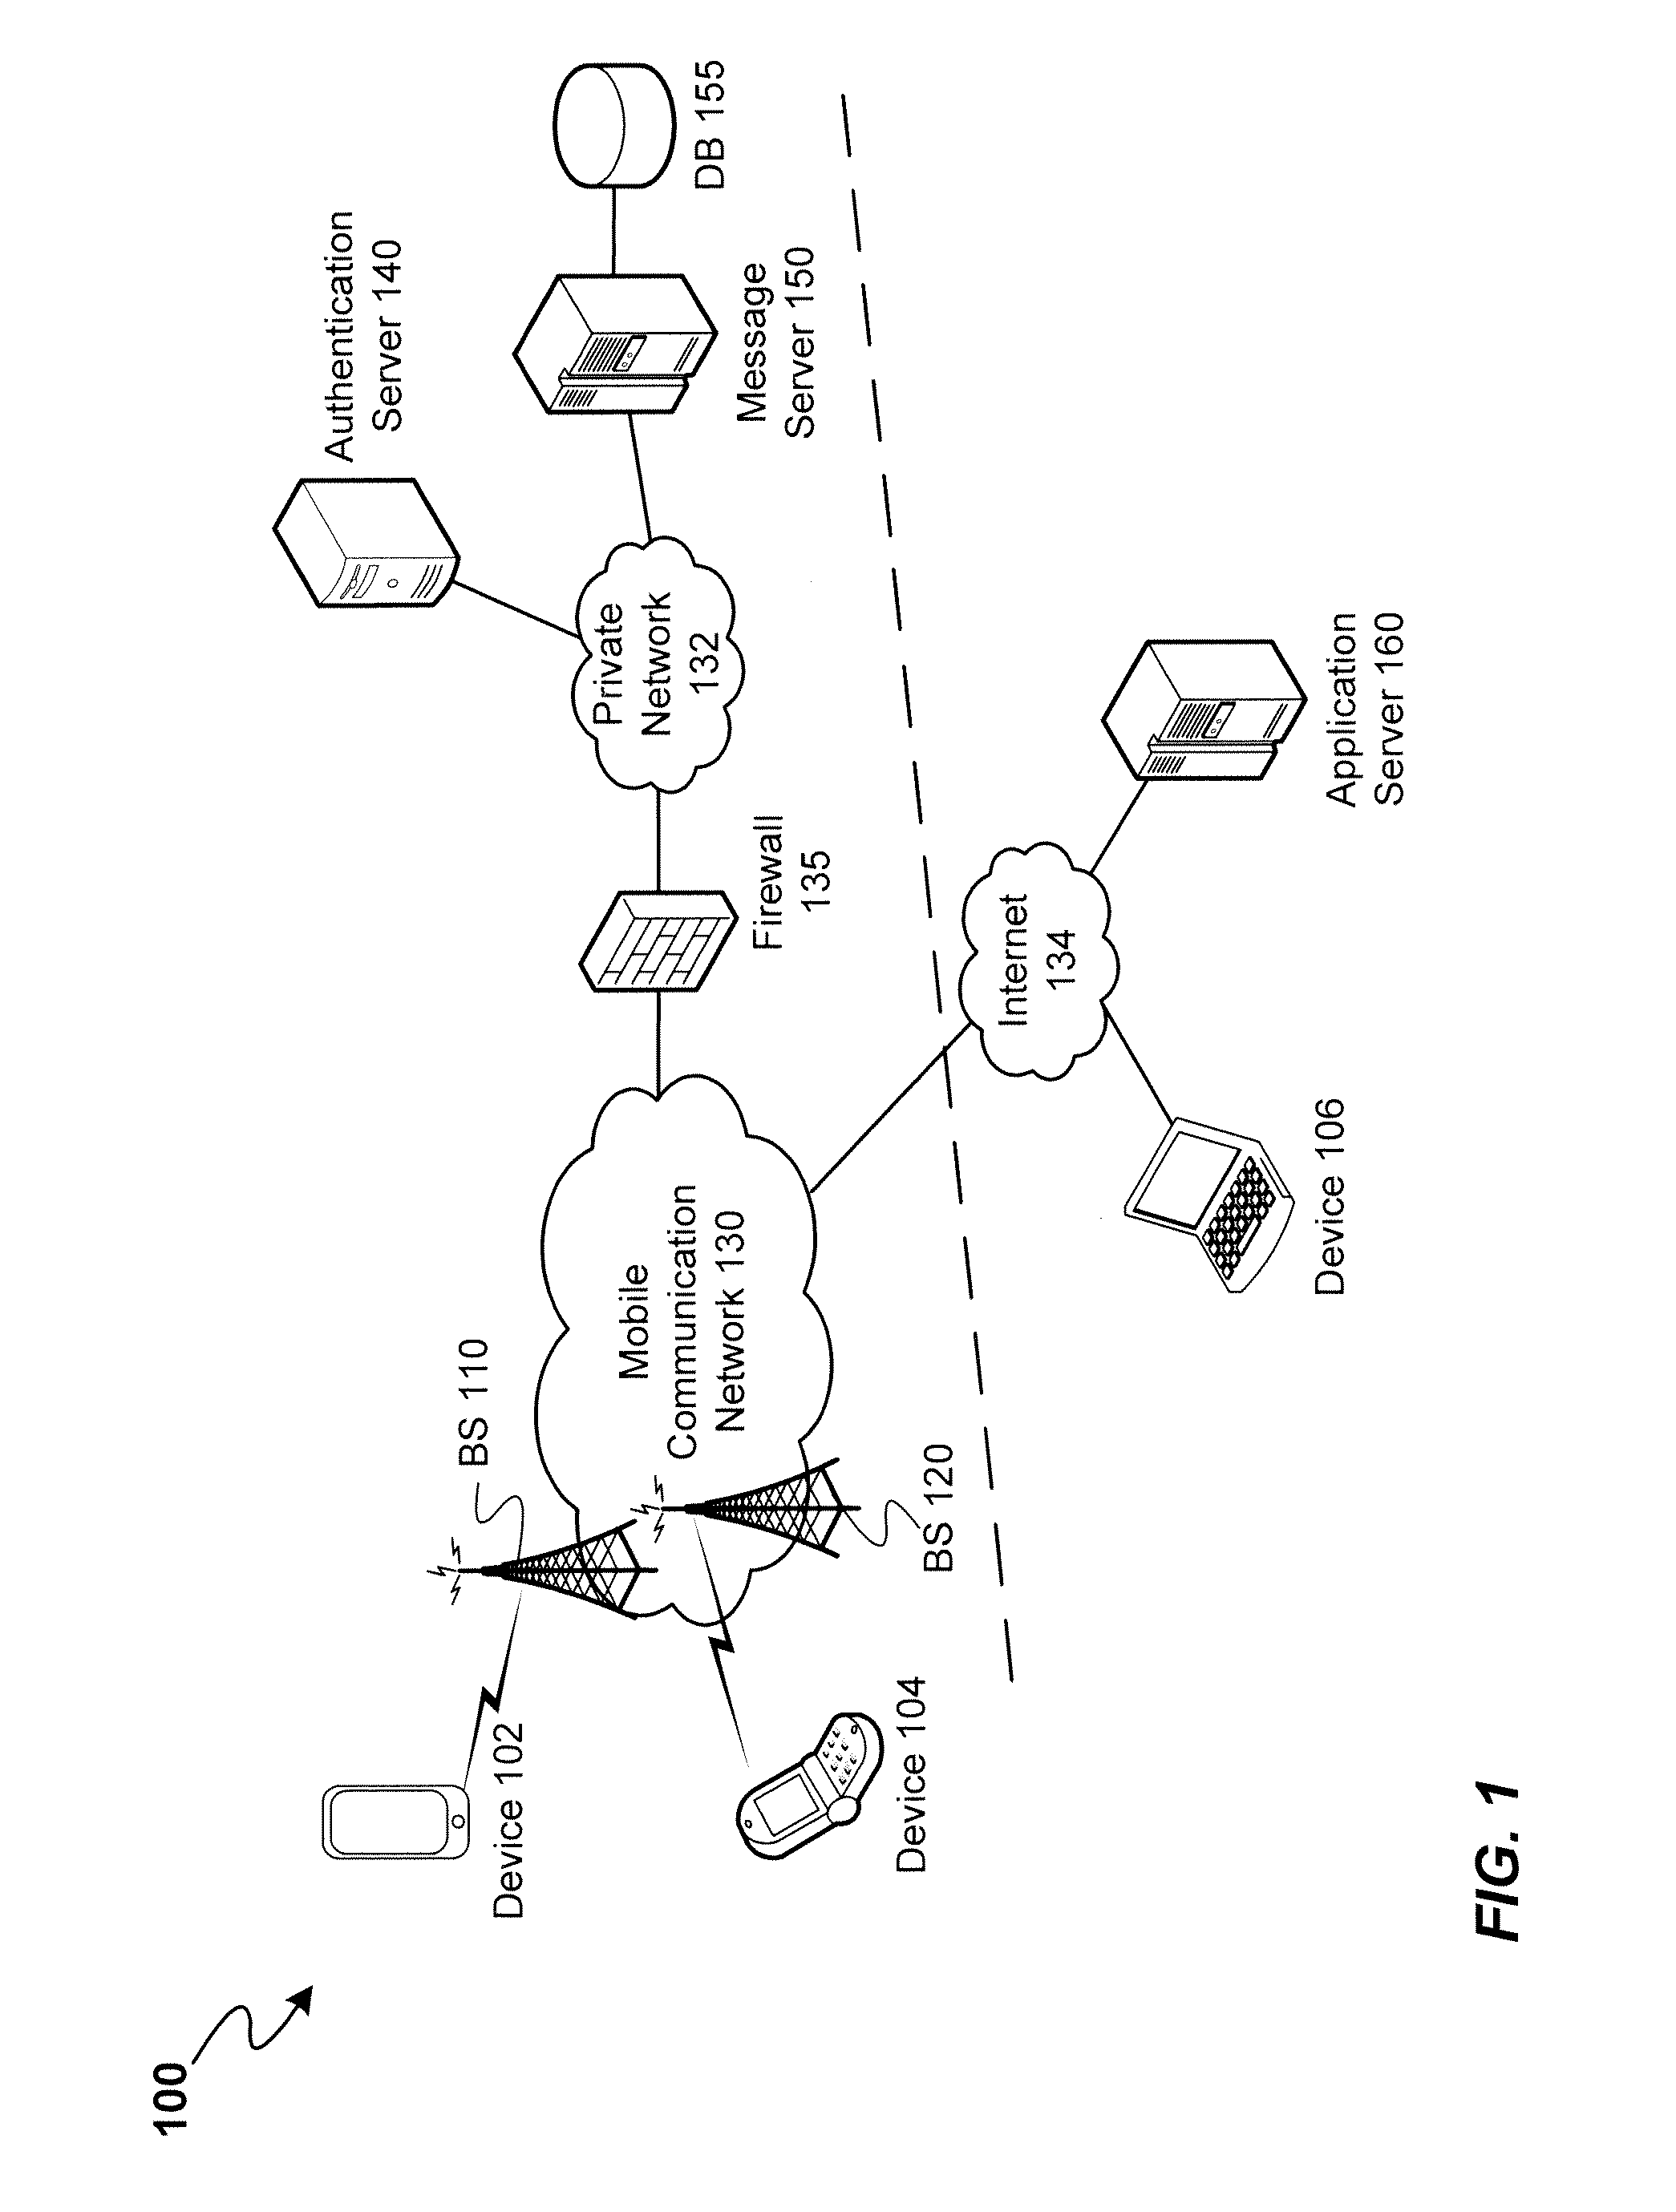 Modified messaging server call flow for secured mobile-to-mobile messaging